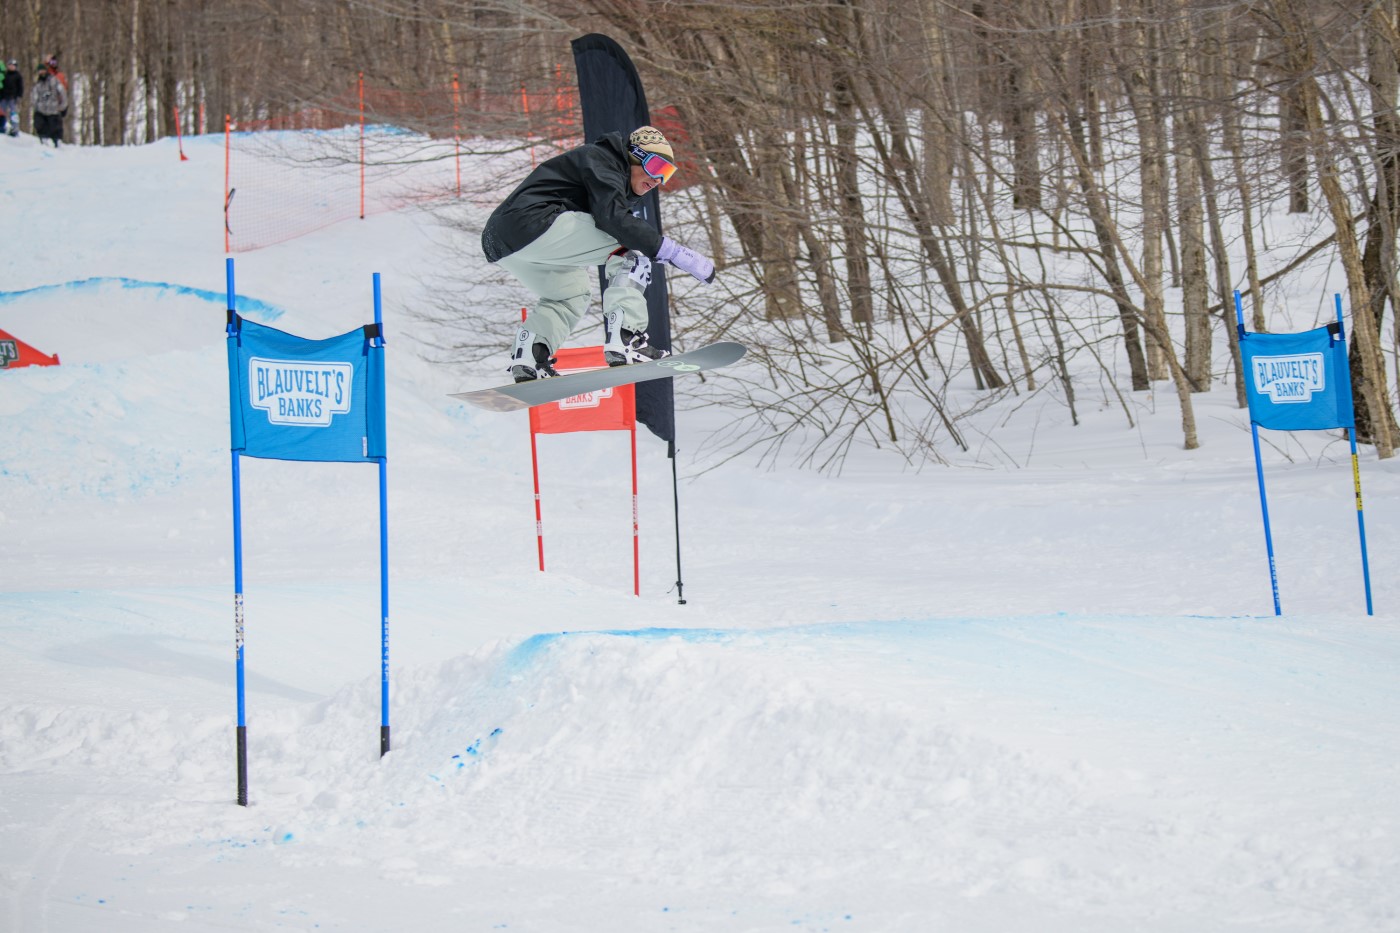 A snowboarder gets air during the 2023 Blauvelt's Banks at Bolton Valley